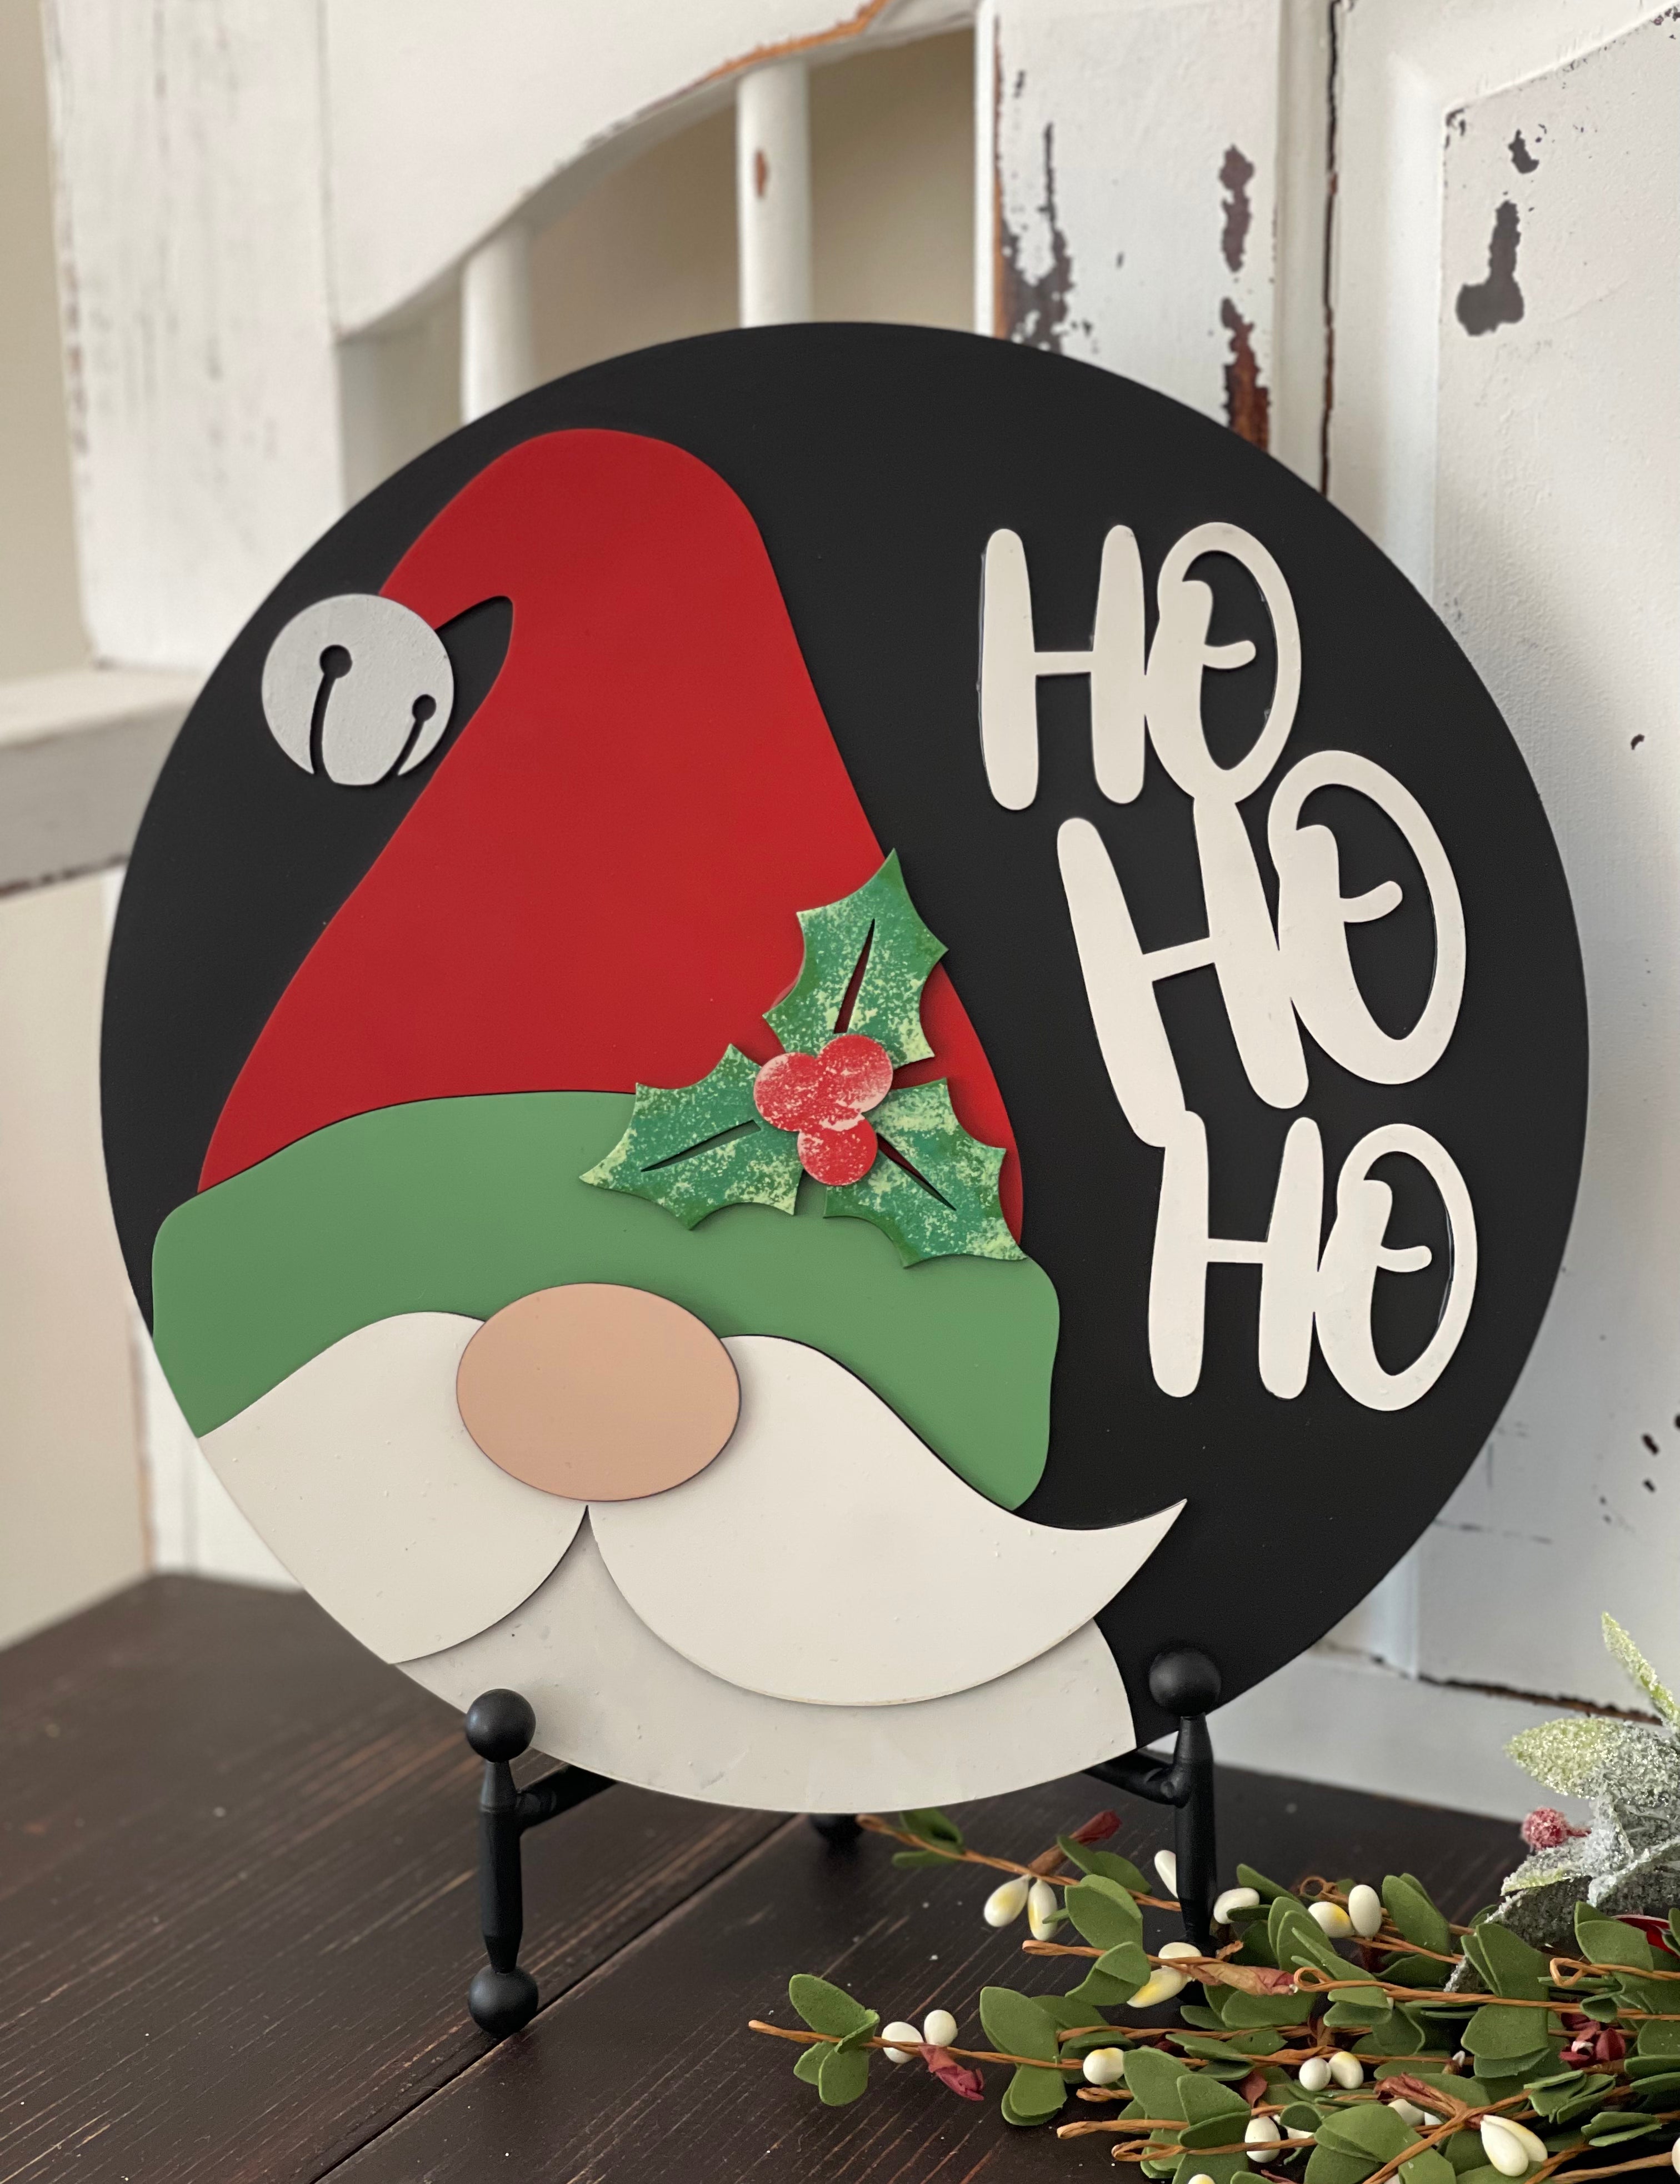 This image shows the hand painted 3D santa sign that reads Ho Ho Ho. The sign is sitting on an easel.